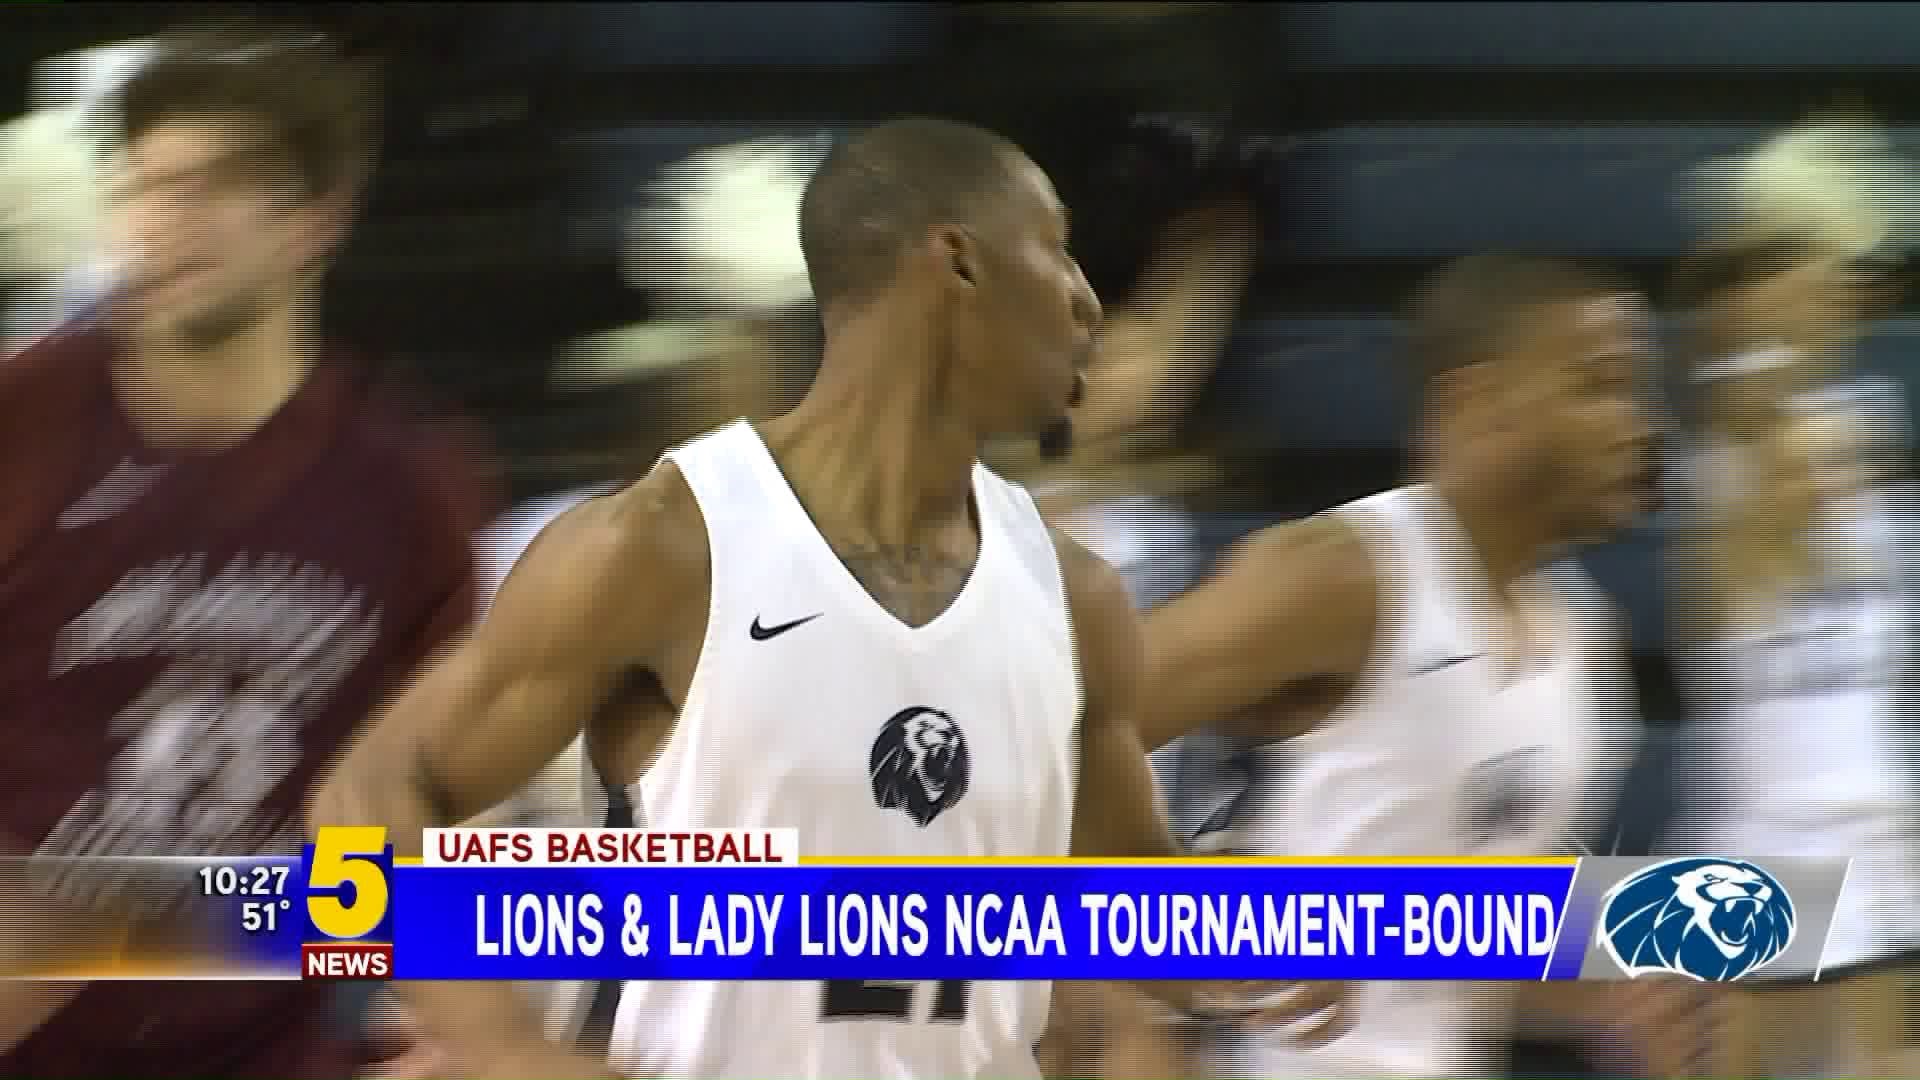 Lions & Lady Lions Are Heading To The Big Dance